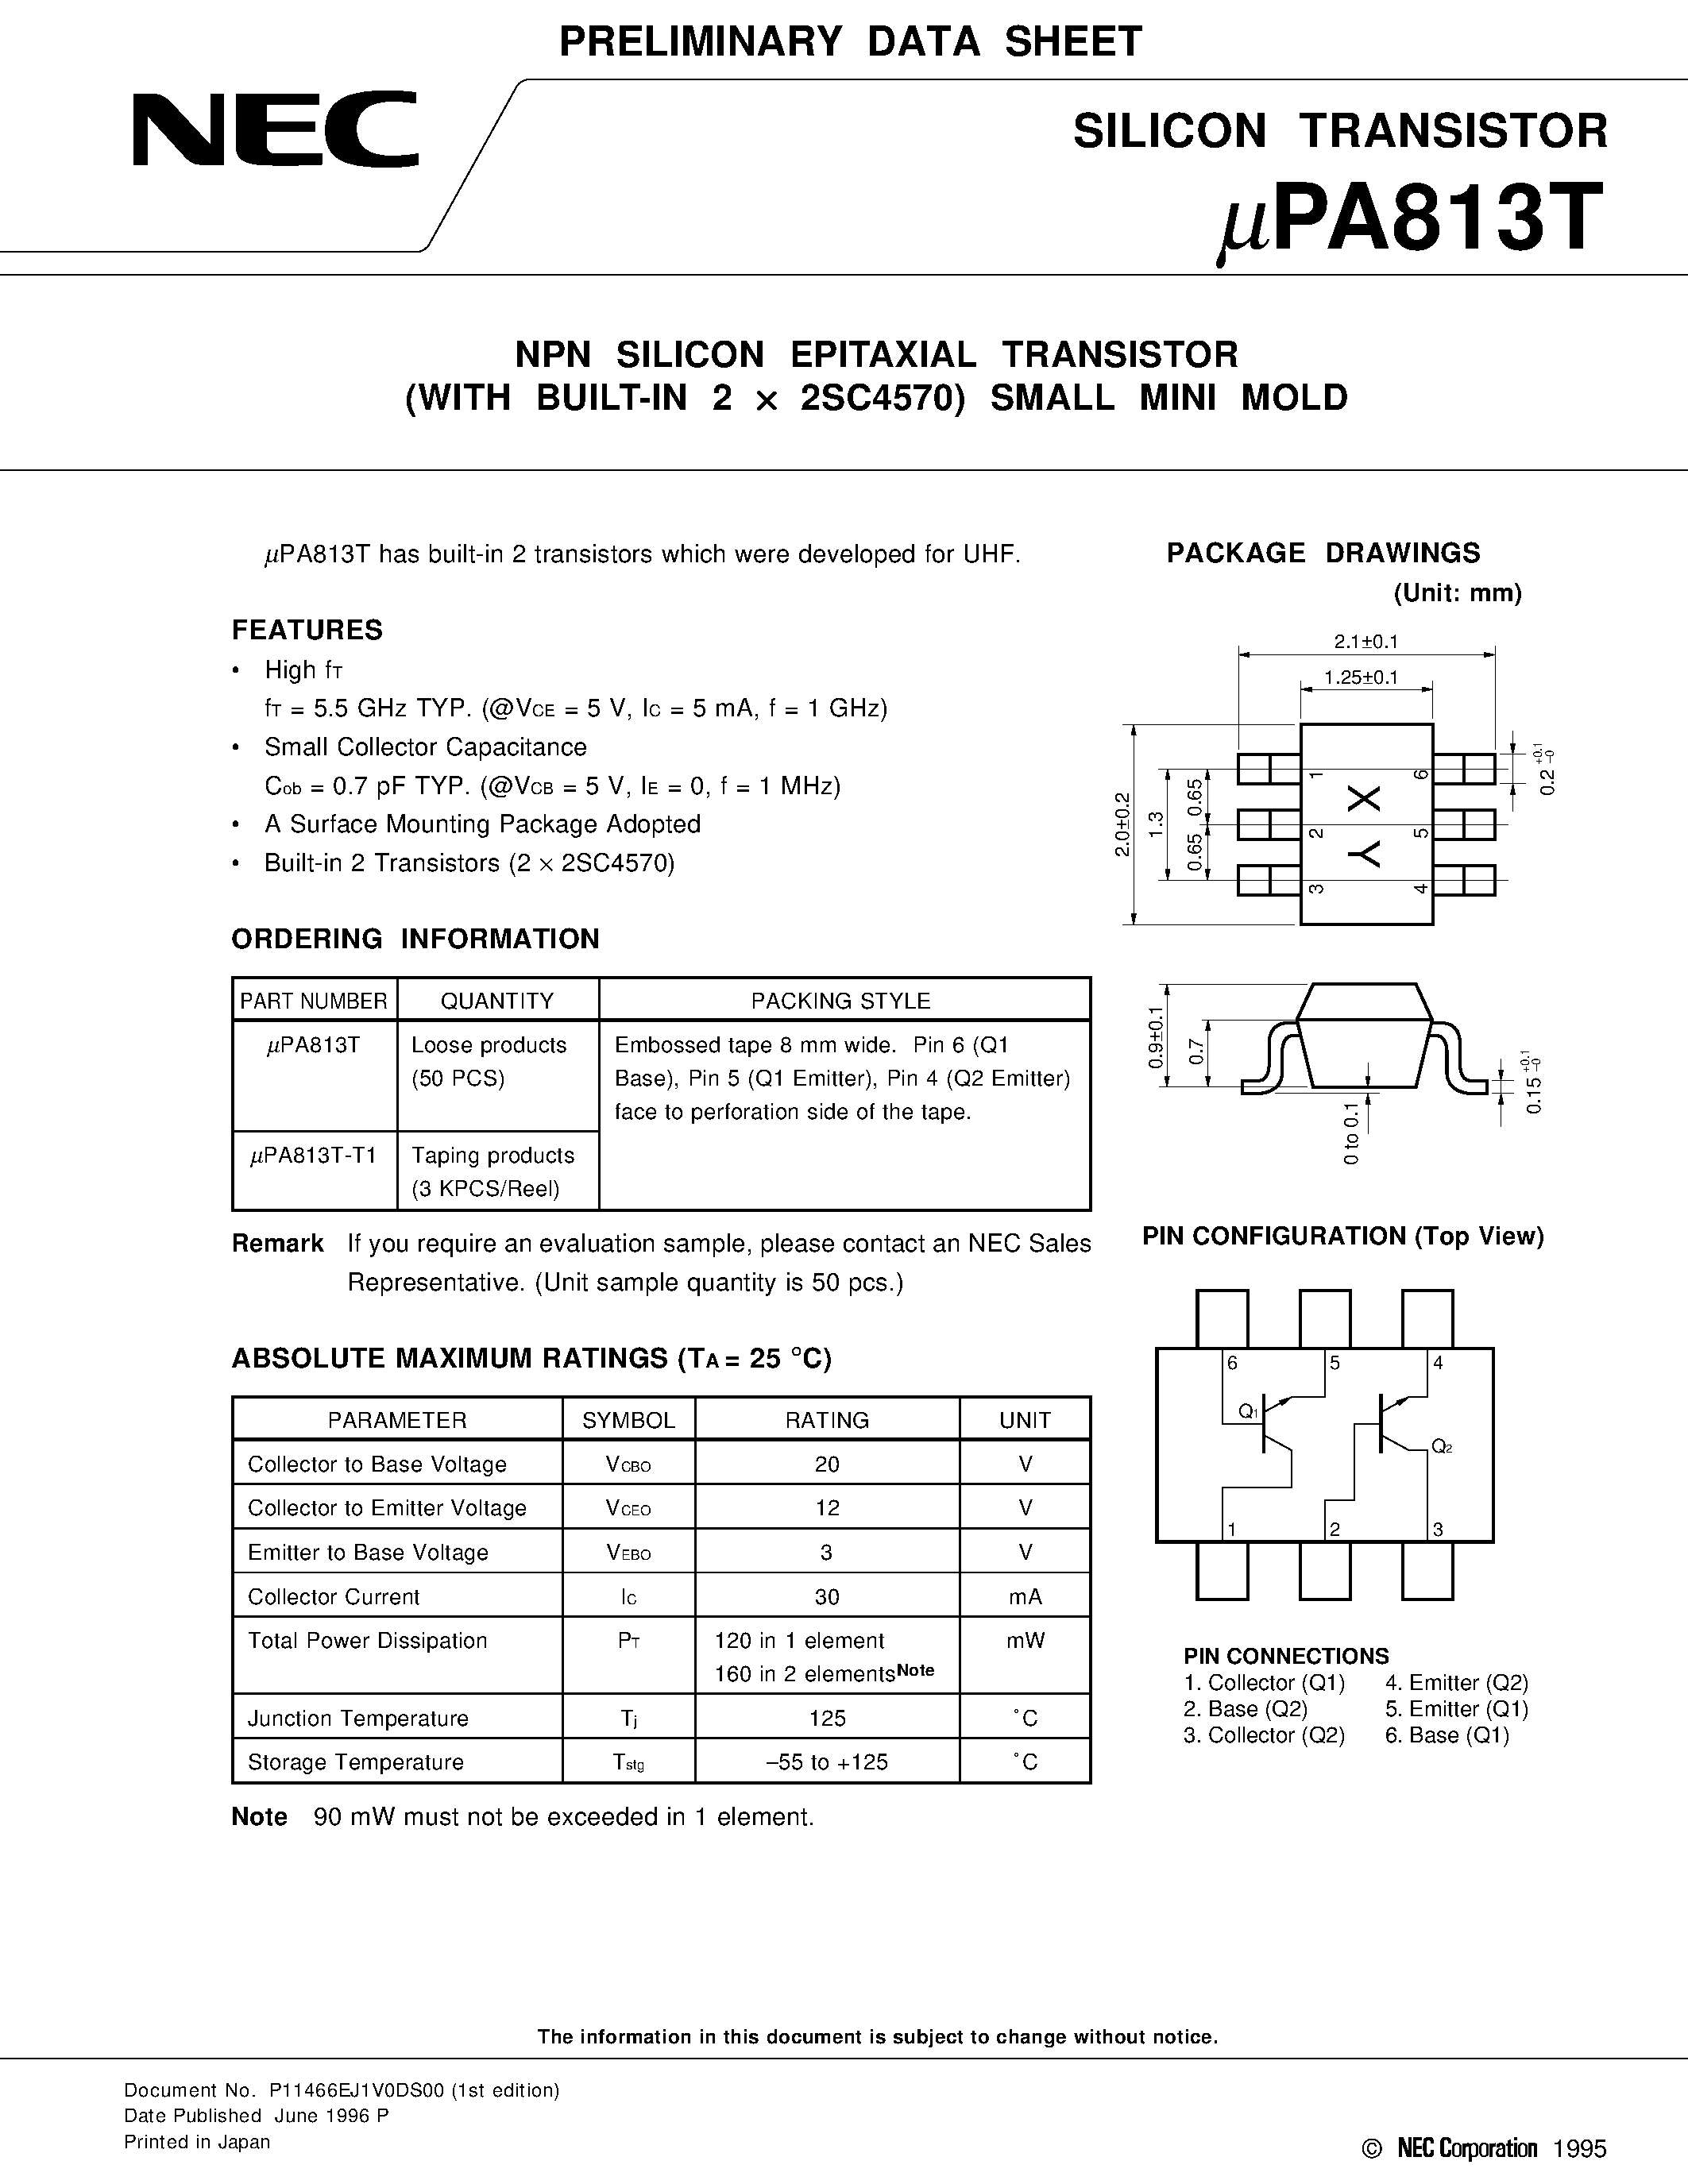 Datasheet UPA813T - NPN SILICON EPITAXIAL TRANSISTOR WITH BUILT-IN 2 x 2SC4570 SMALL MINI MOLD page 1